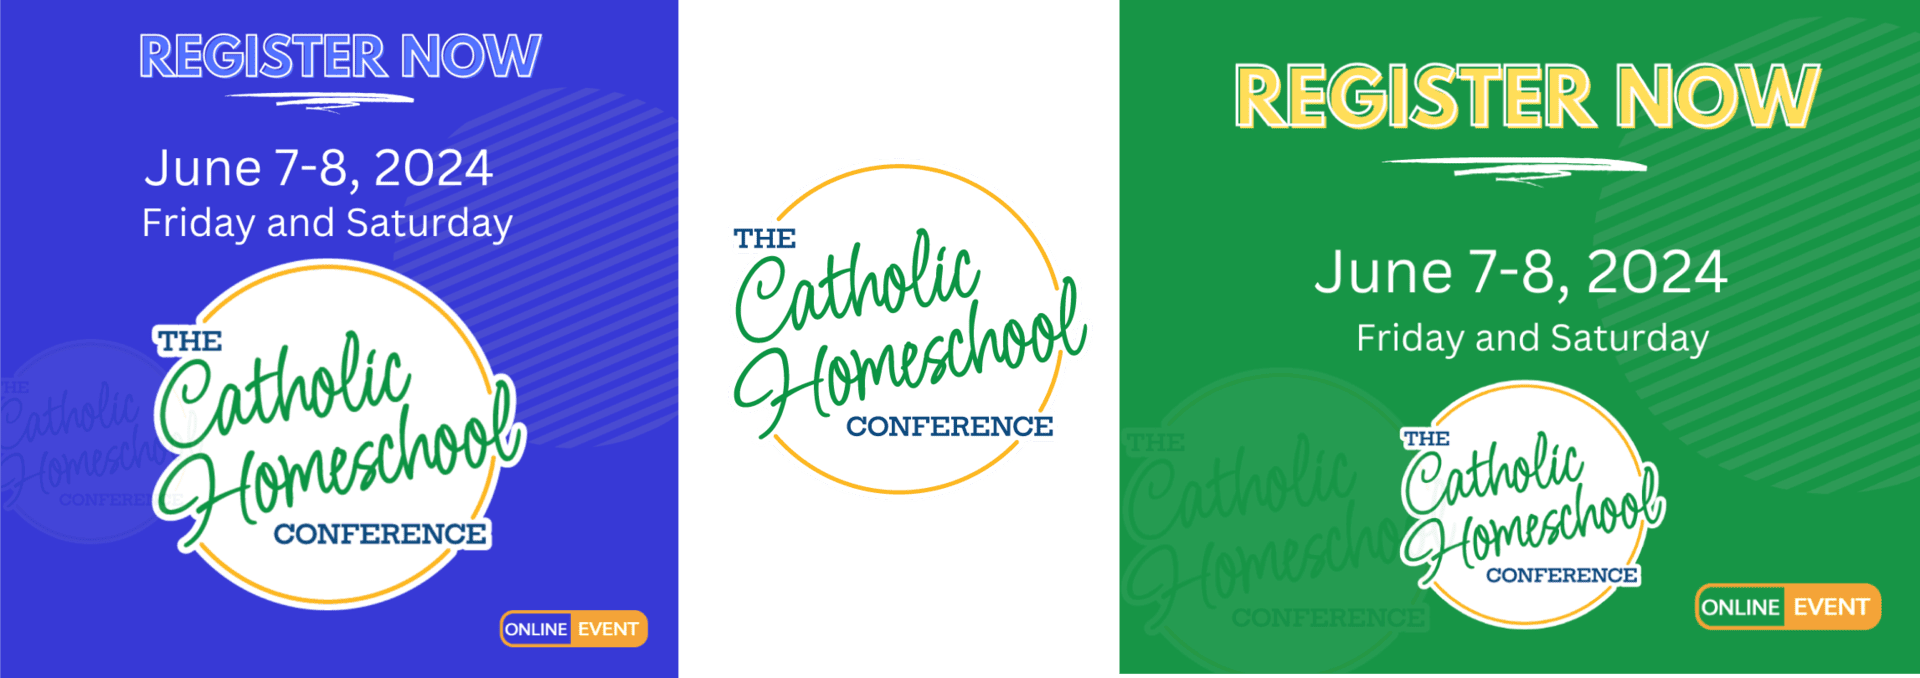 THE Catholic Homeschool Conference logos side by side